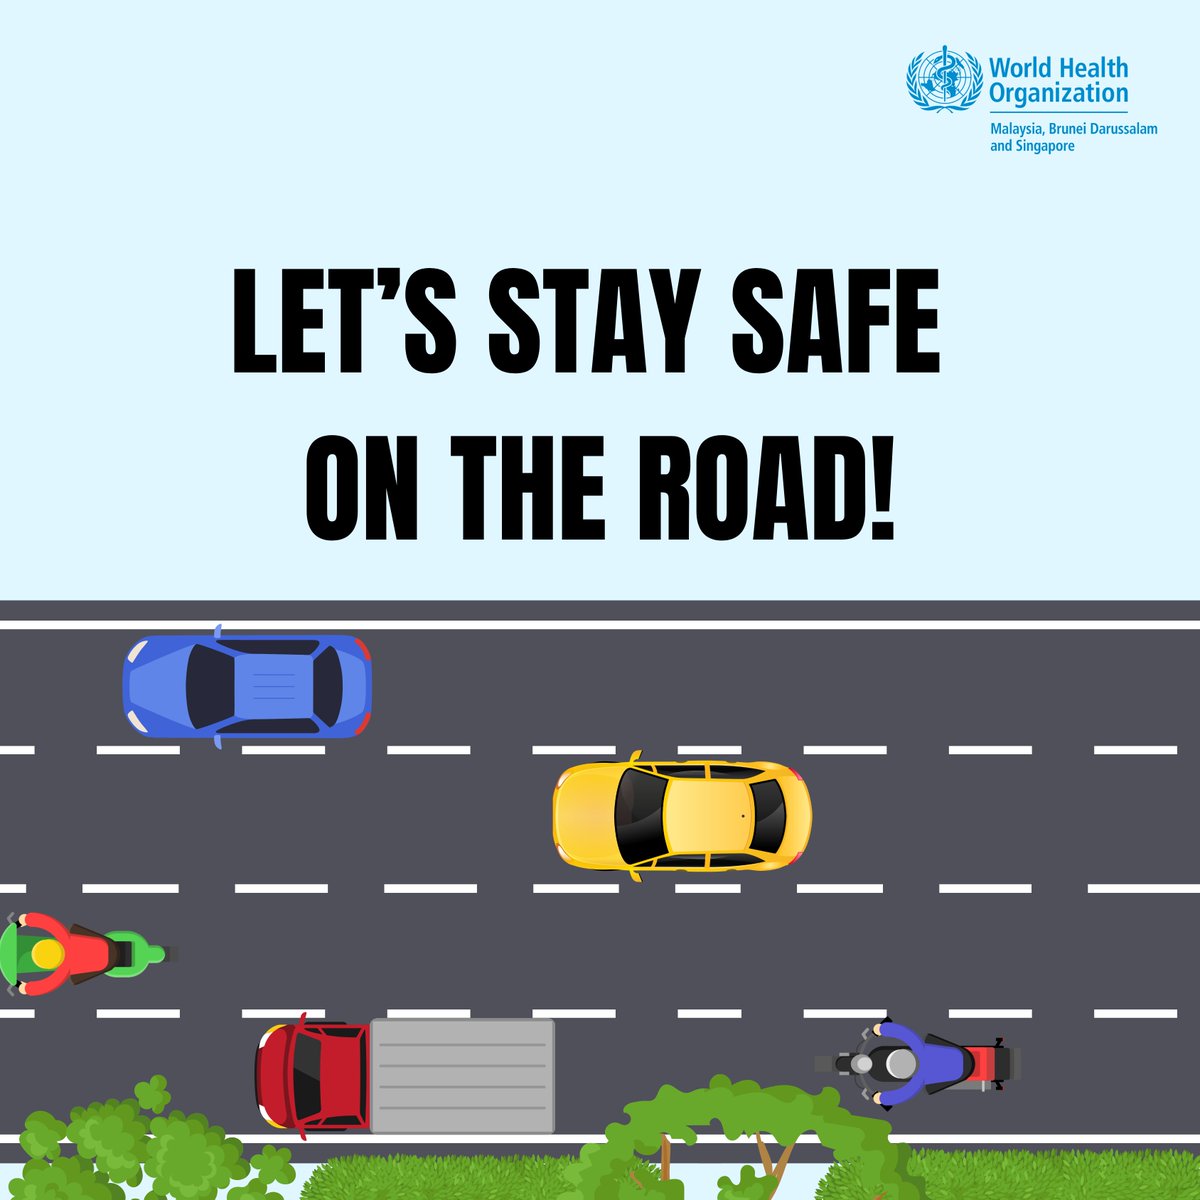 Are you travelling back to your hometown for the Hari Raya celebrations? Stay tuned for a set of tips you can follow to ensure a safe journey on the road for you and your family! #RoadSafety